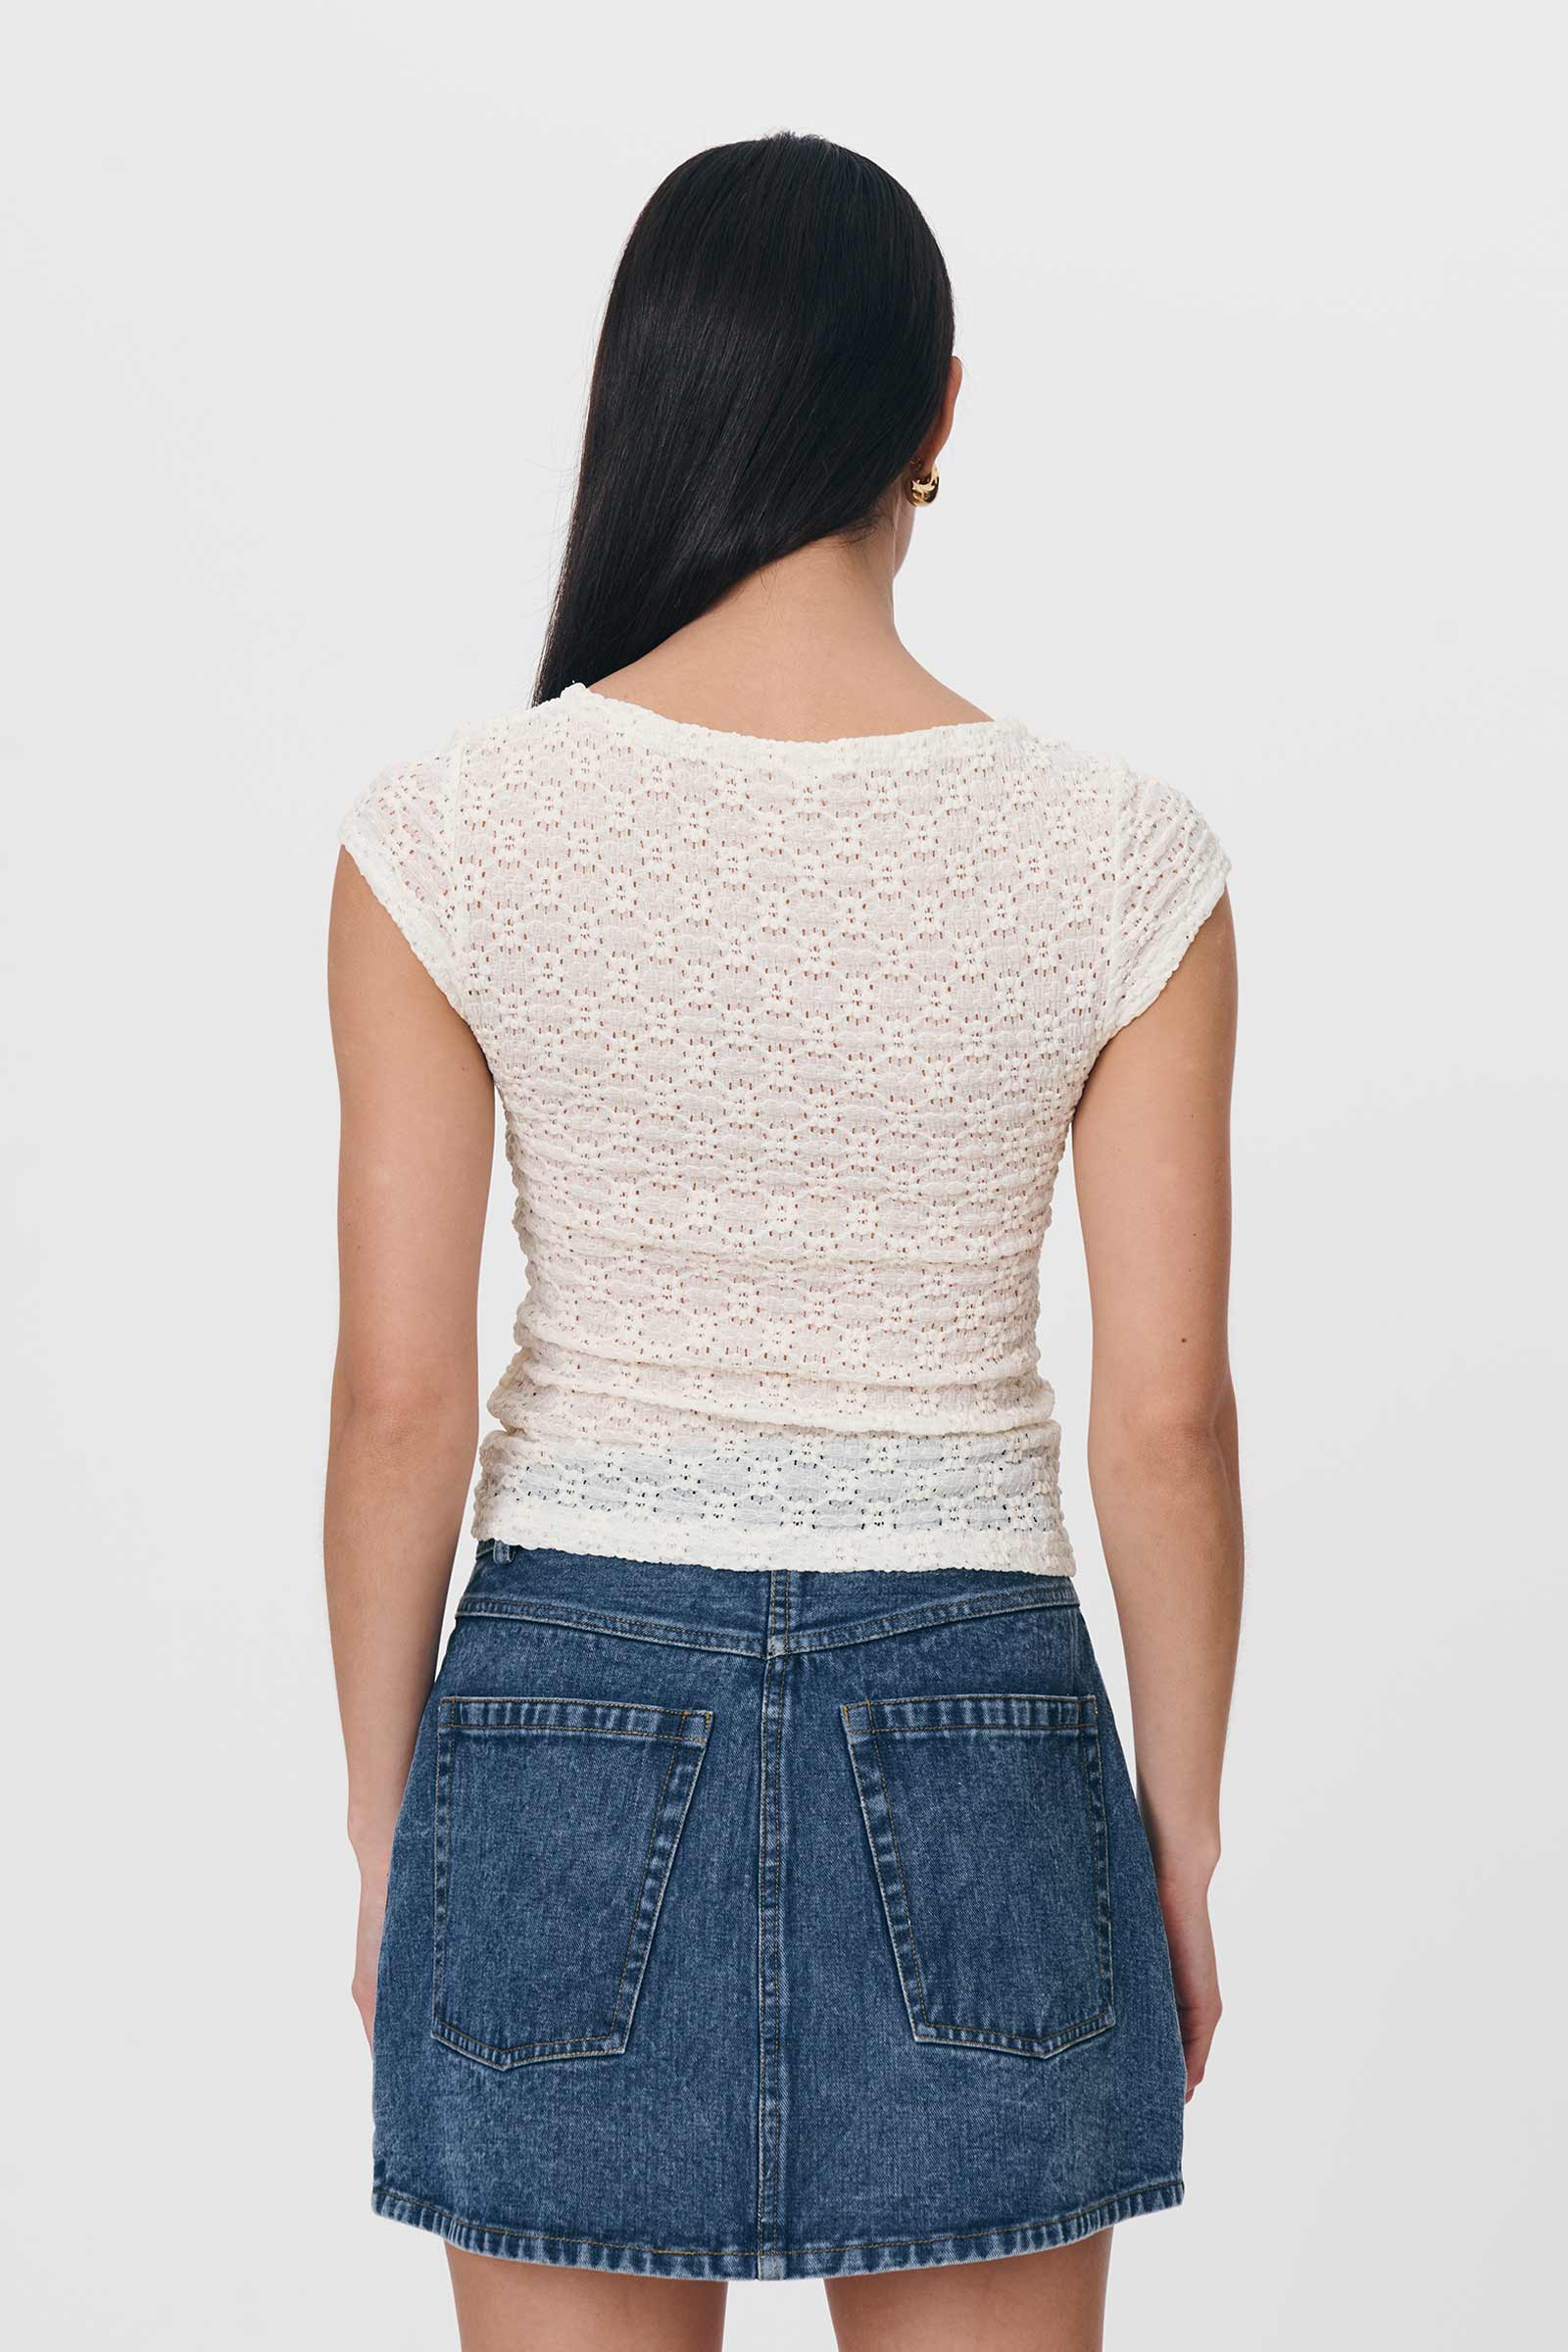 Galo Daisy Lace Tee Creme